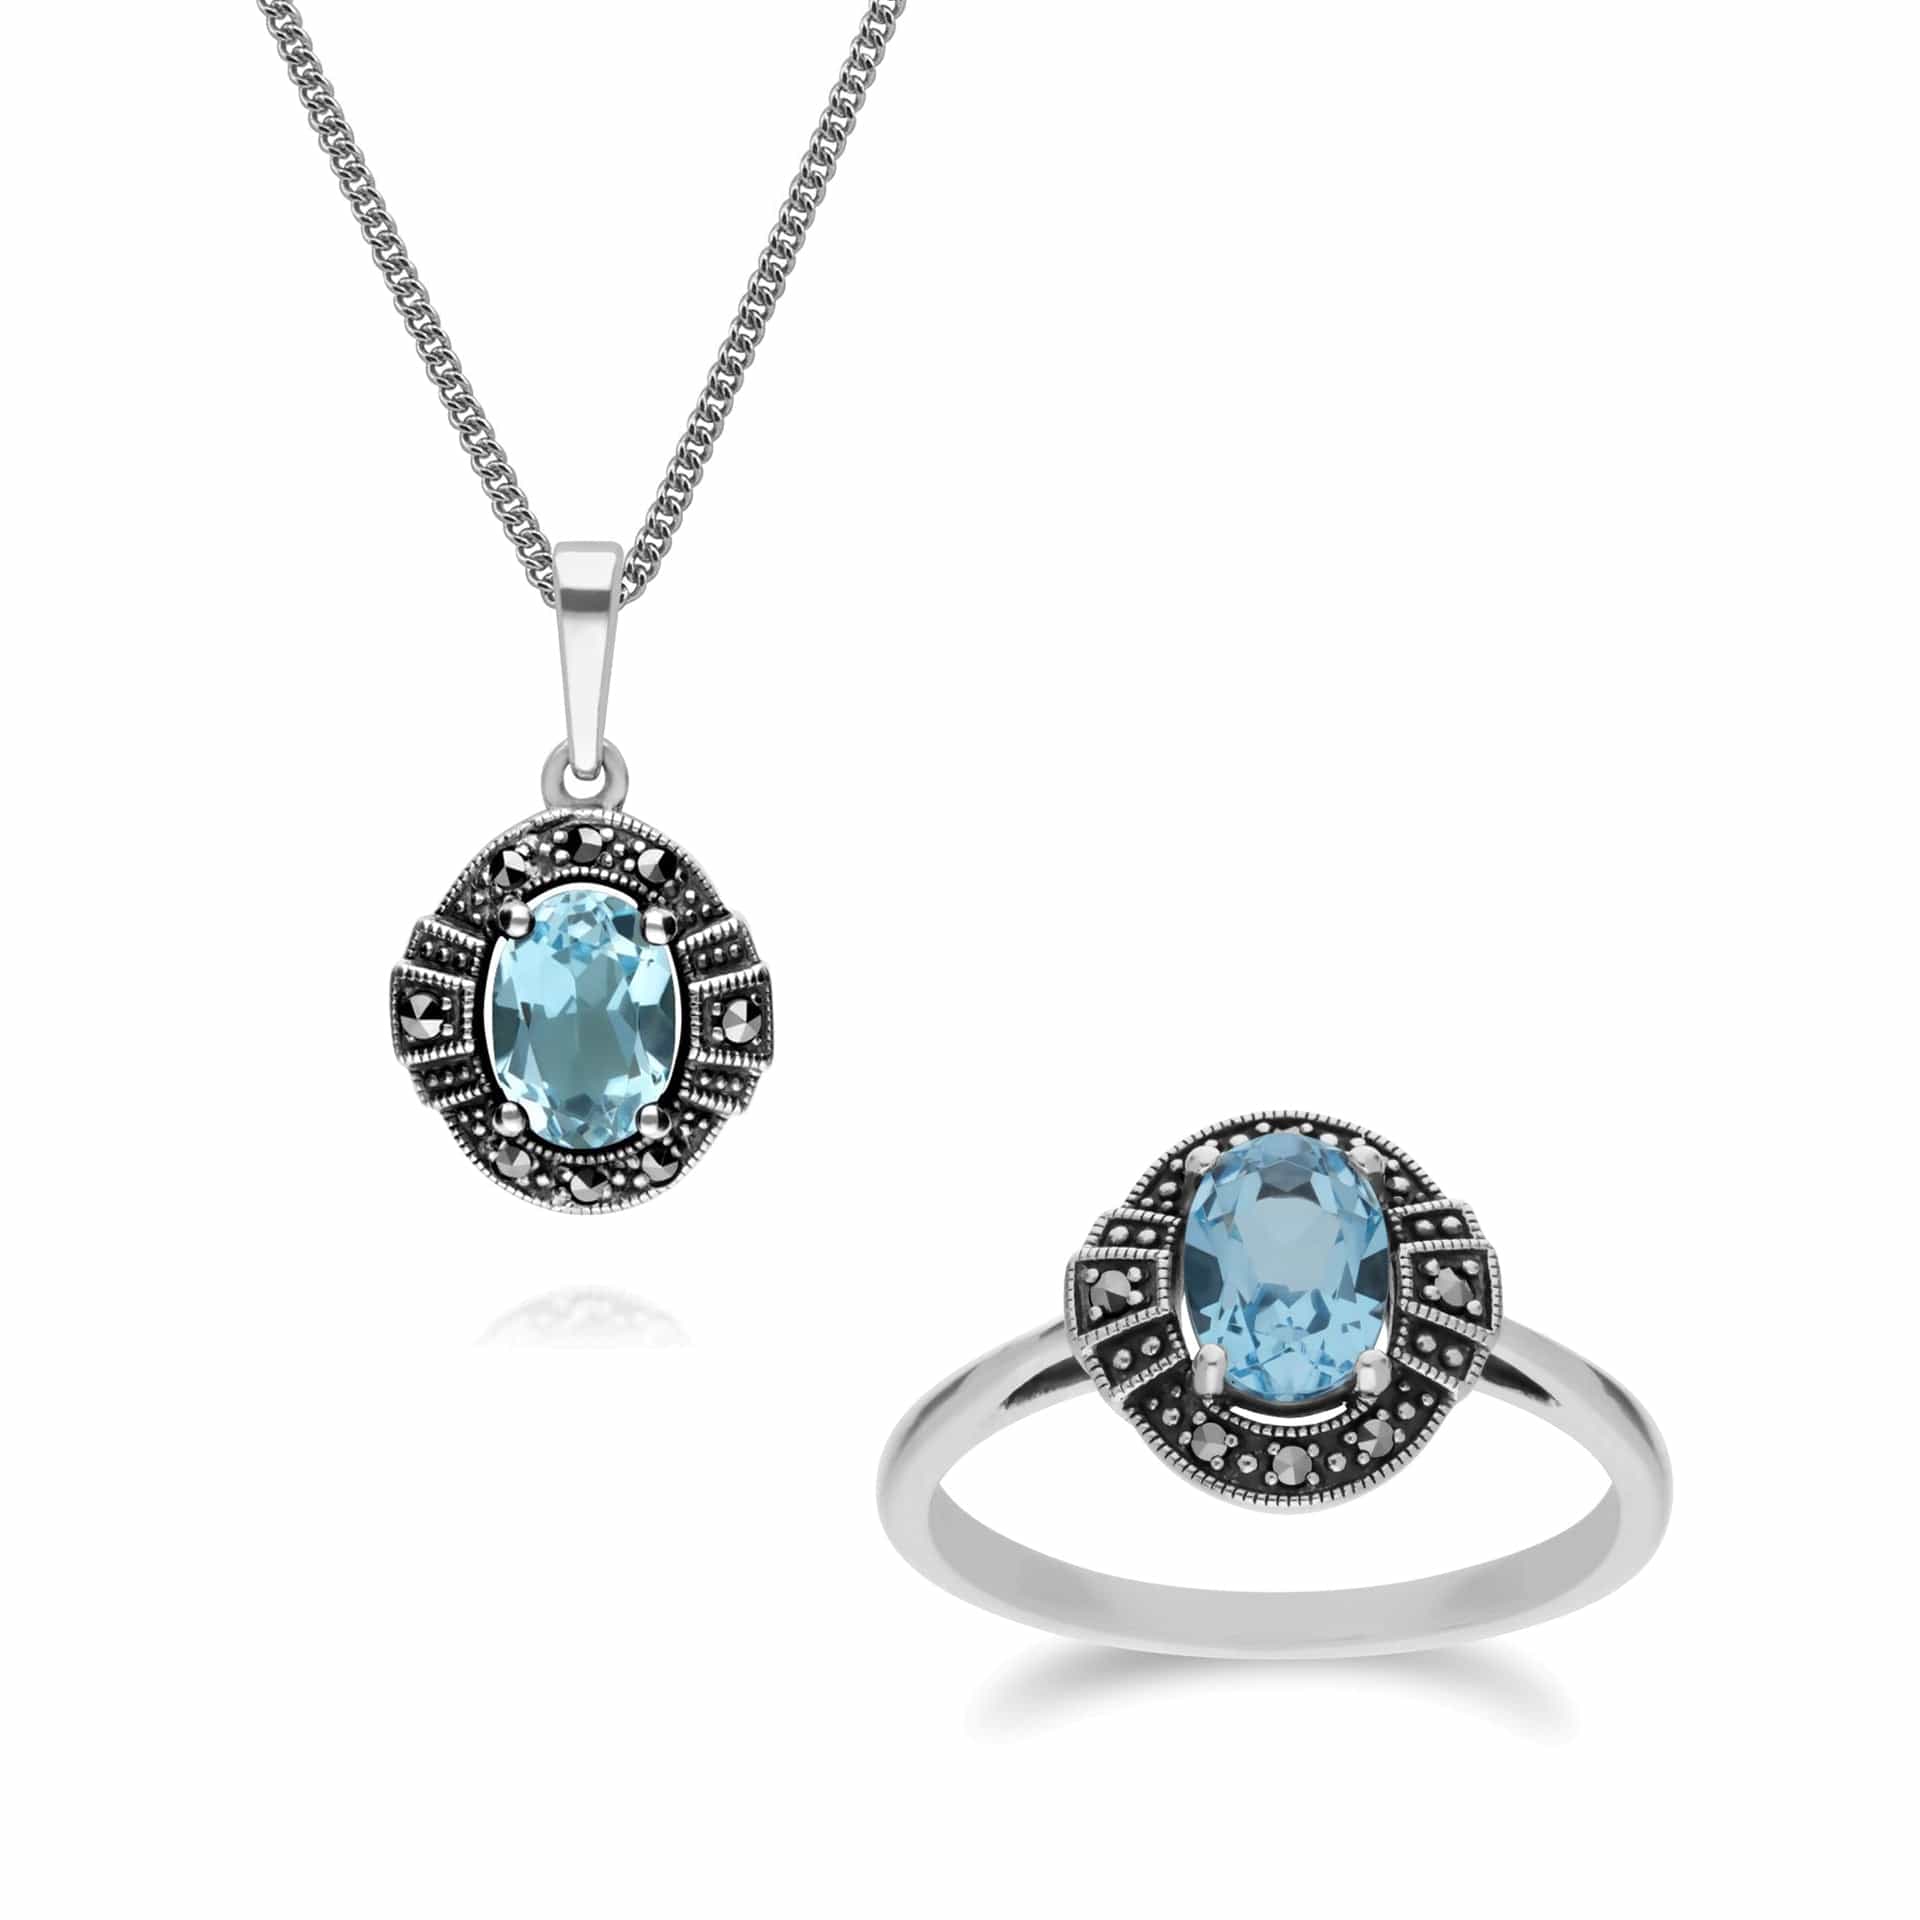 214P303301925-214R605701925 Art Deco Style Oval Blue Topaz and Marcasite Cluster Rings & Pendant Set in 925 Sterling Silver 1